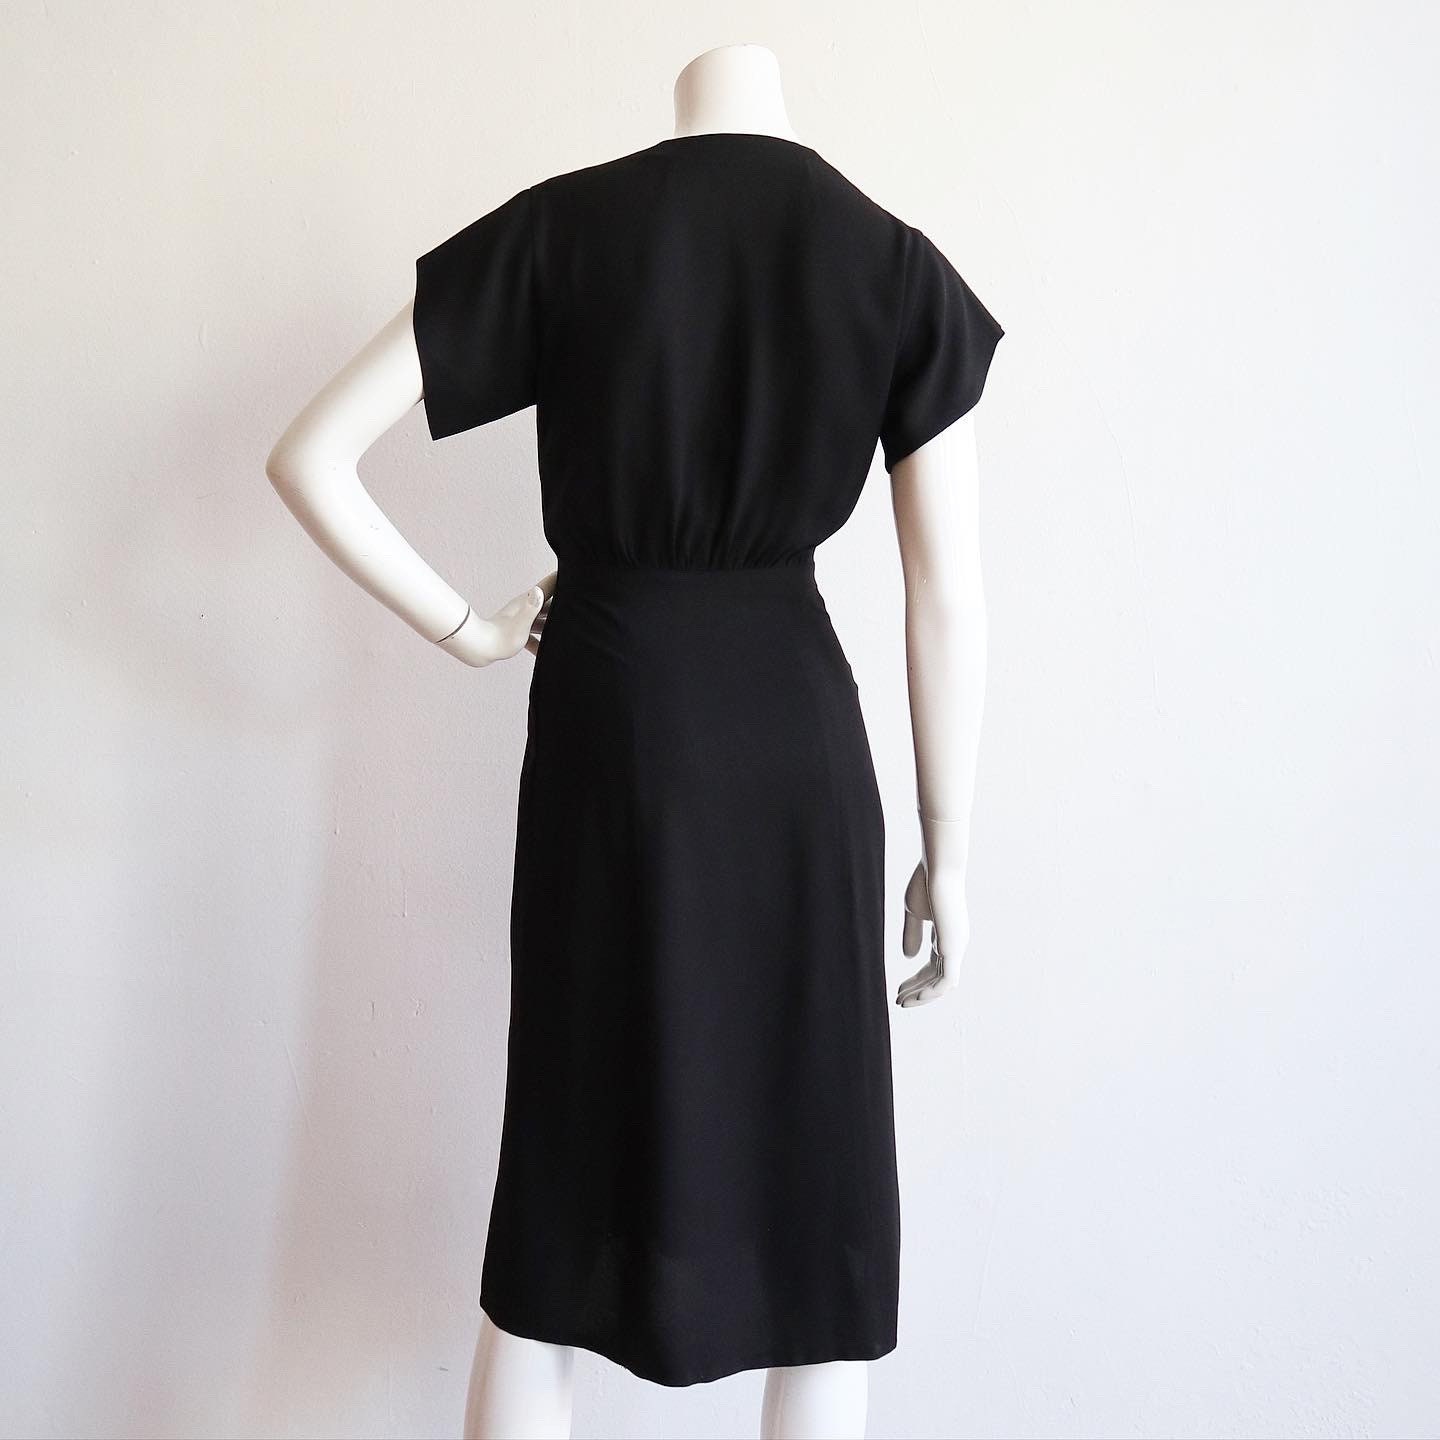 Vintage 1940s | Medium | Rayon crepe dress with beautiful floral ...